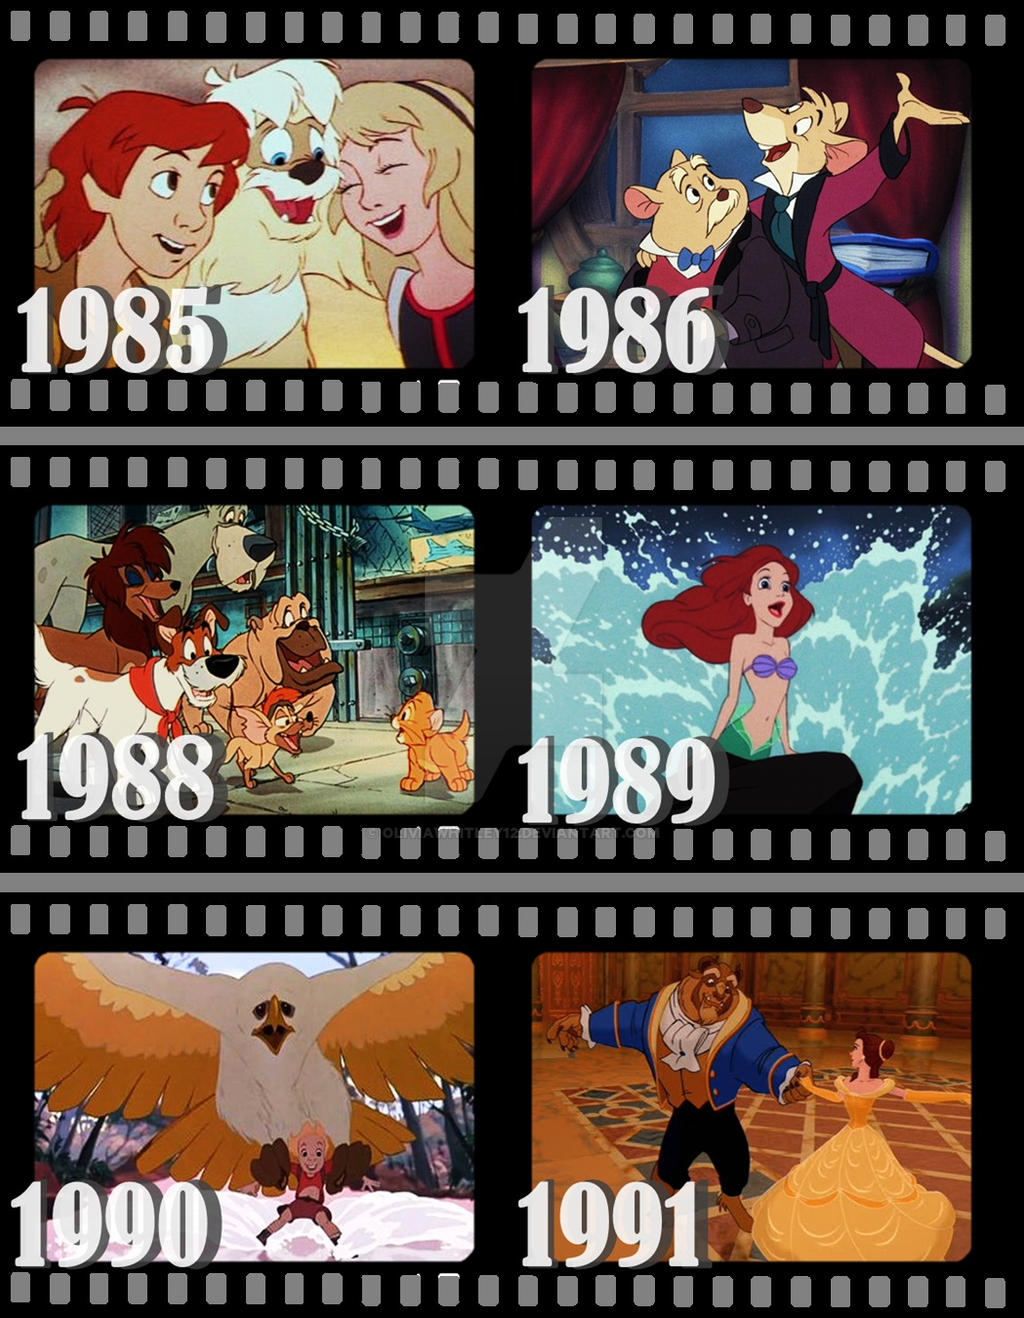 Disney Animated Movies 1985-1991 by OliviaWhitley12 on DeviantArt